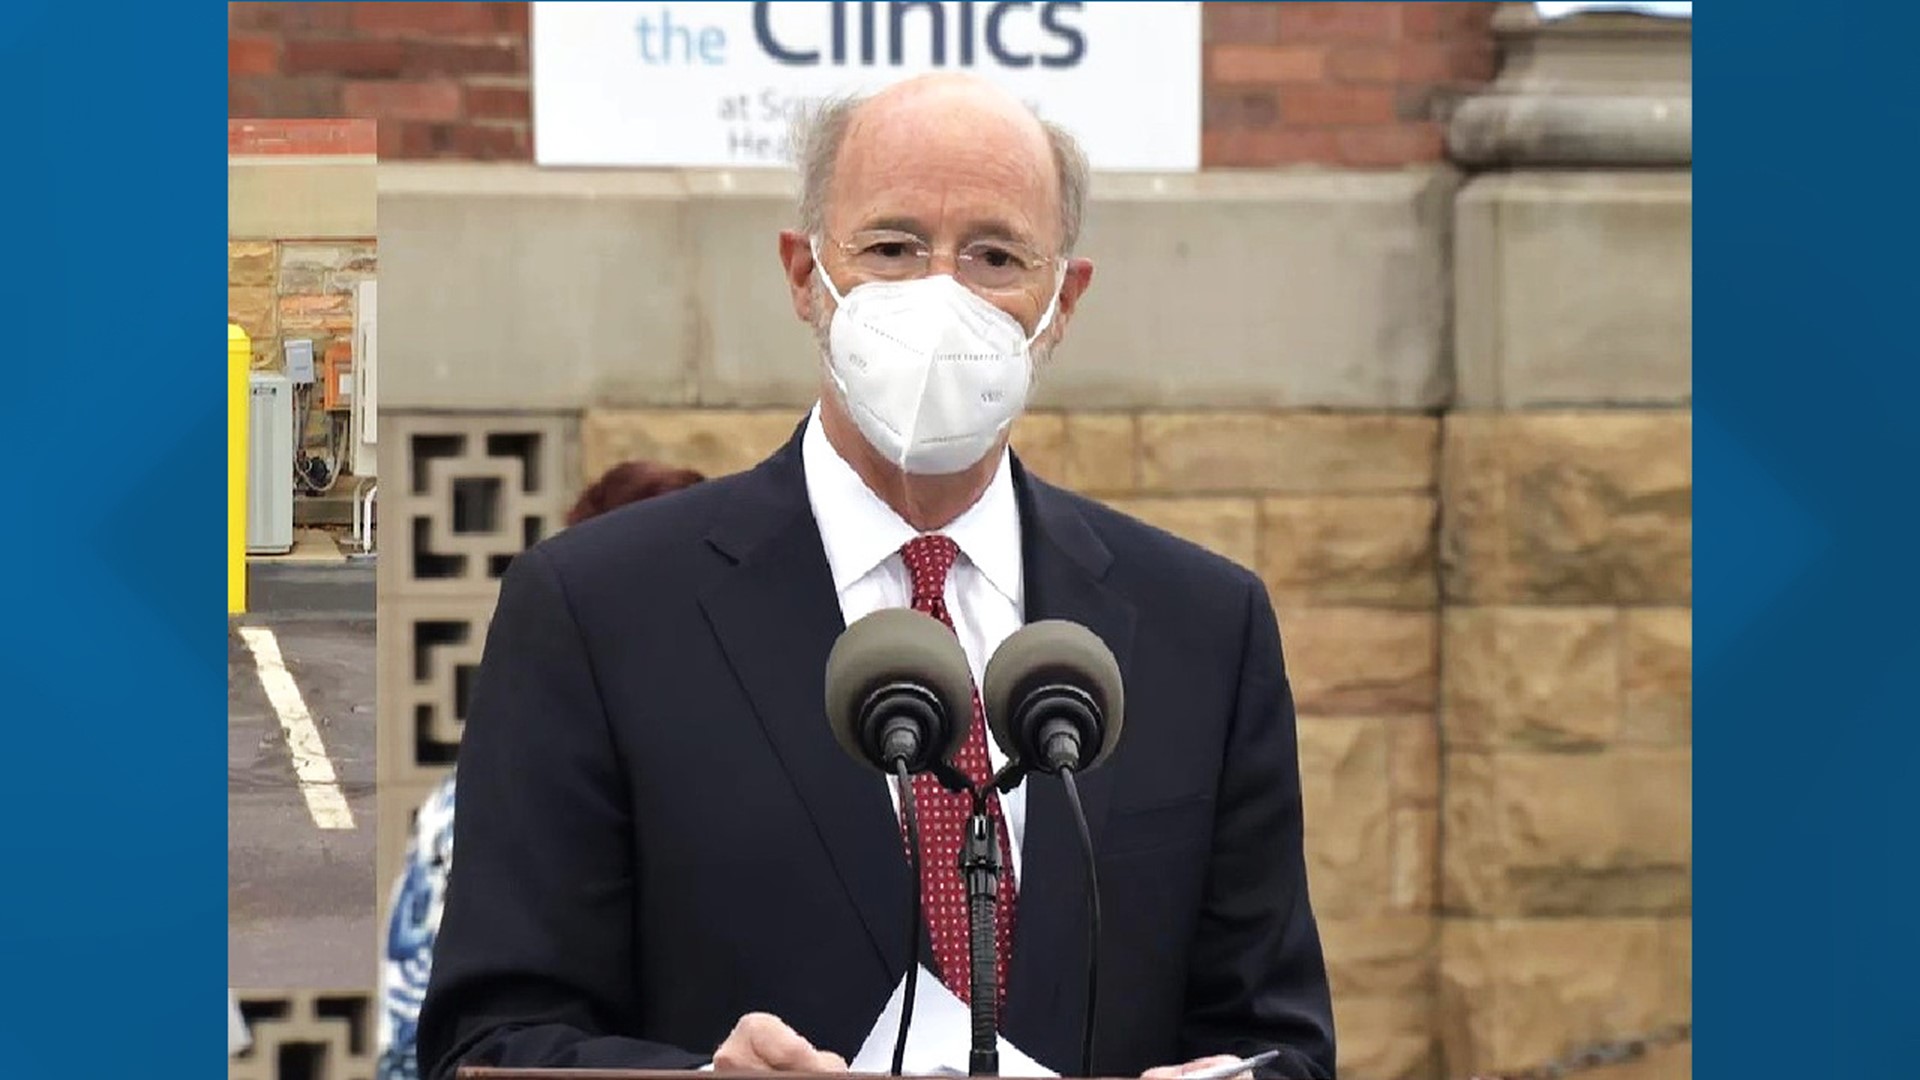 Gov. Wolf praised Primary Health and the progress Pennsylvania is making in the fight against the coronavirus.